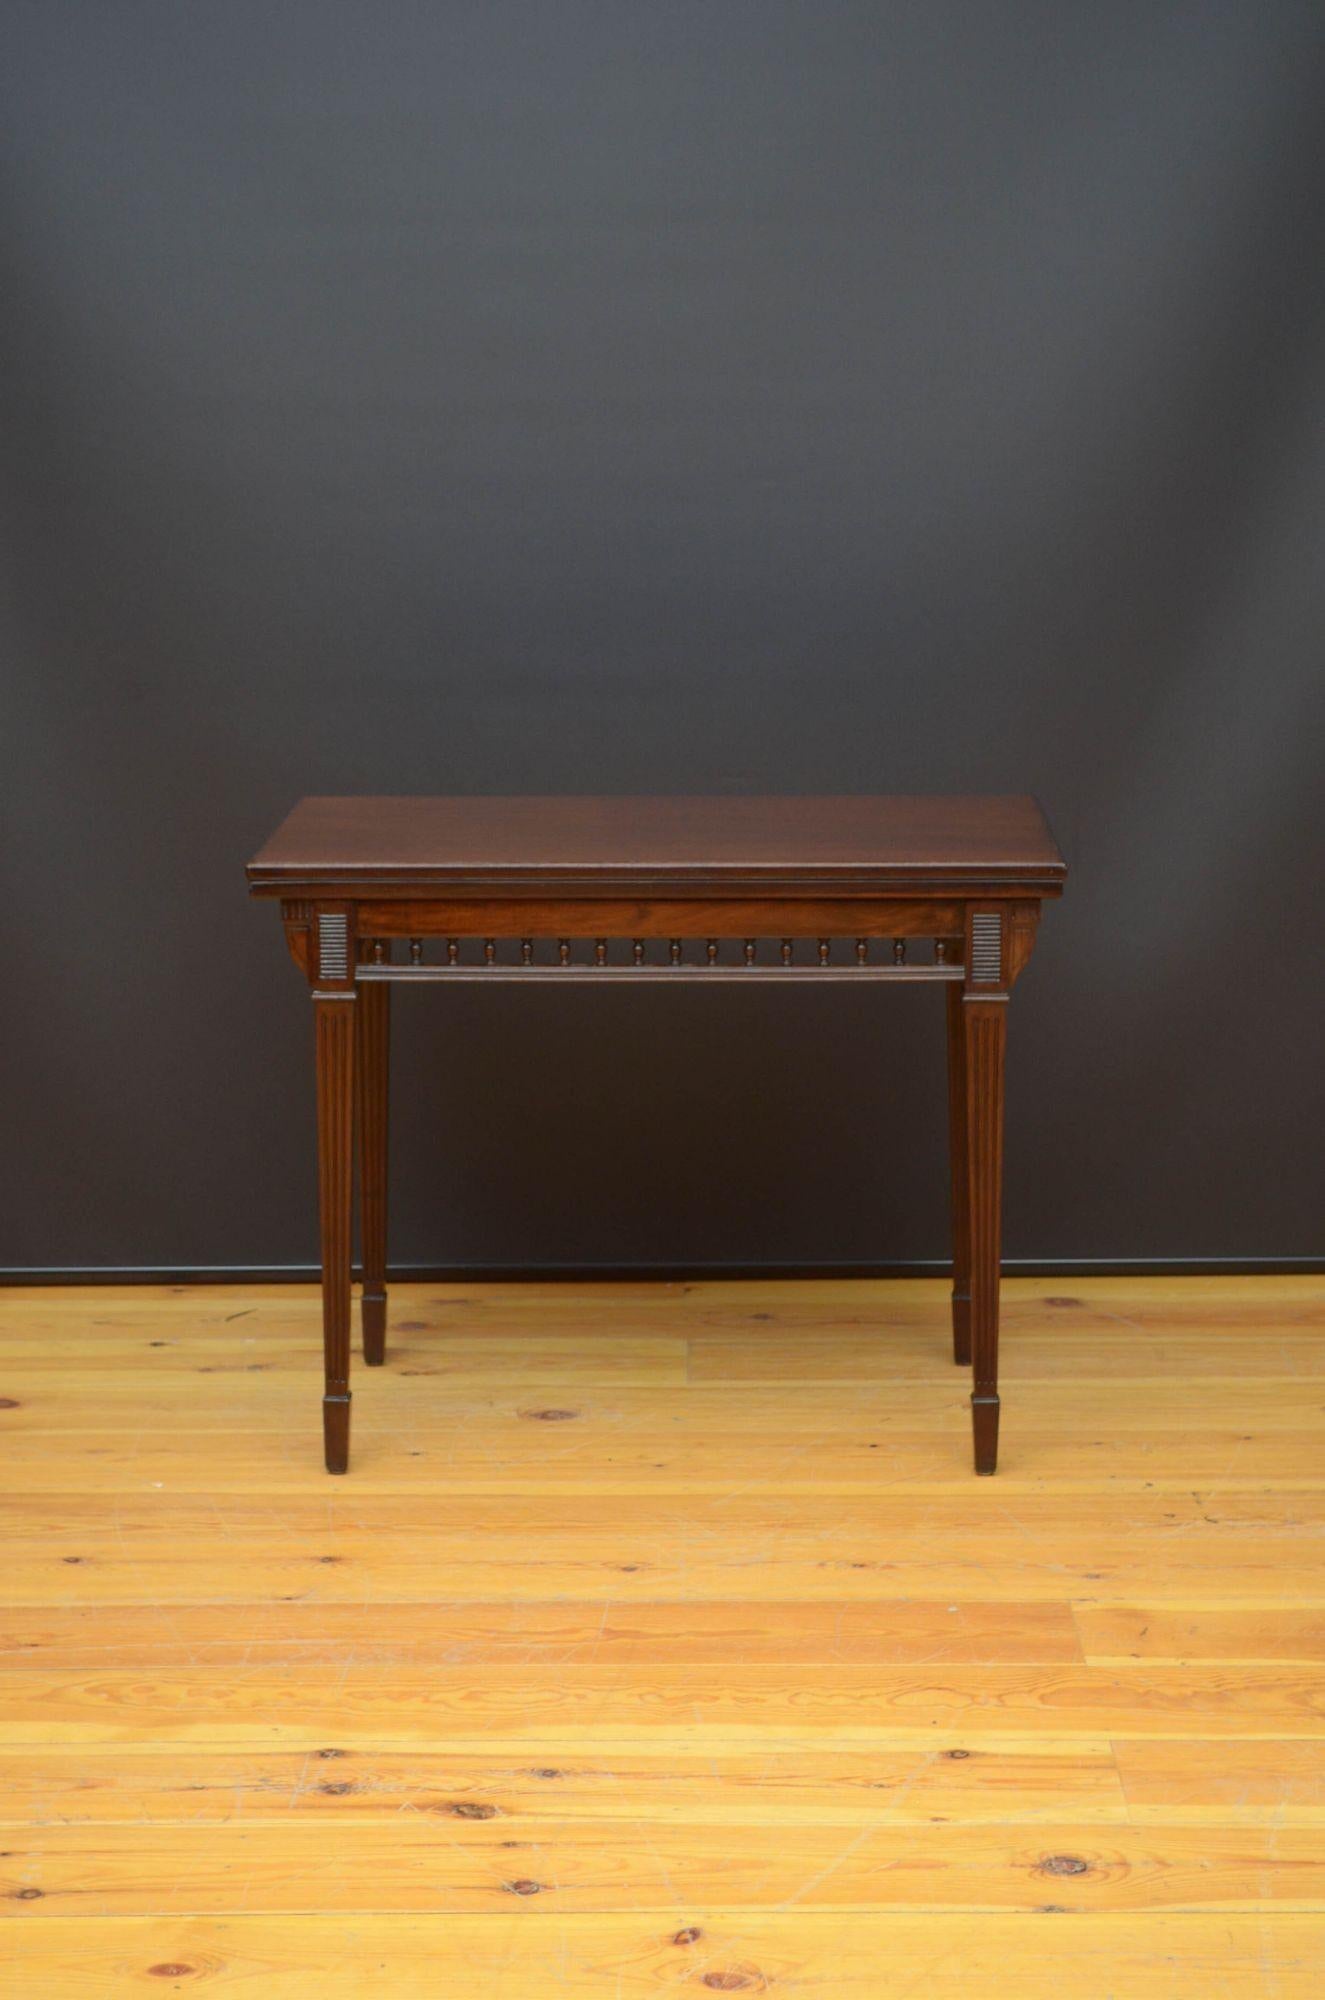 J023 A superb quality Edwardian Edwards and Roberts card table in mahogany, having figured fold over to enclosing new baize above figured mahogany frieze with decorative spindles, standing on tapered reeded legs terminating in spade feet. This